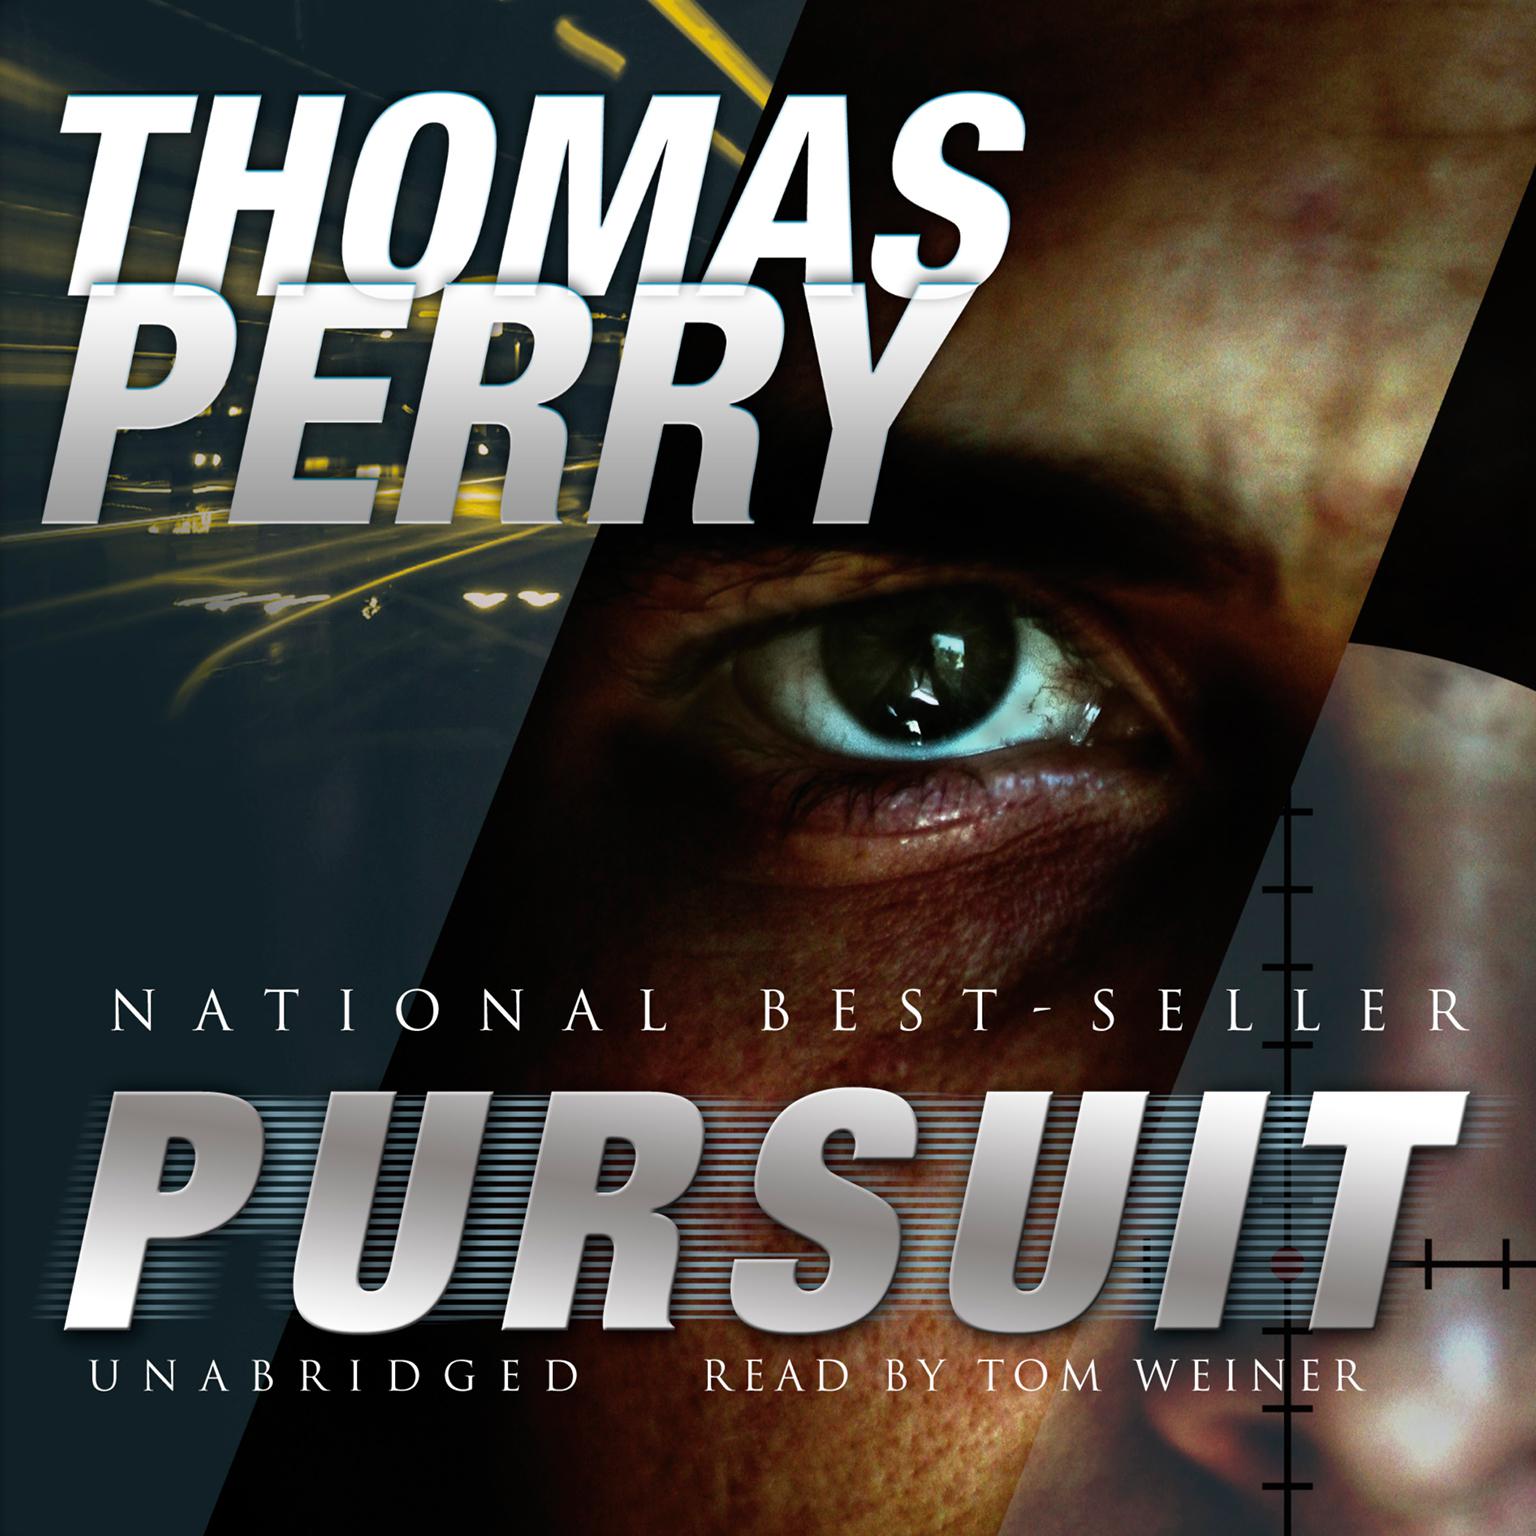 Pursuit Audiobook, by Thomas Perry